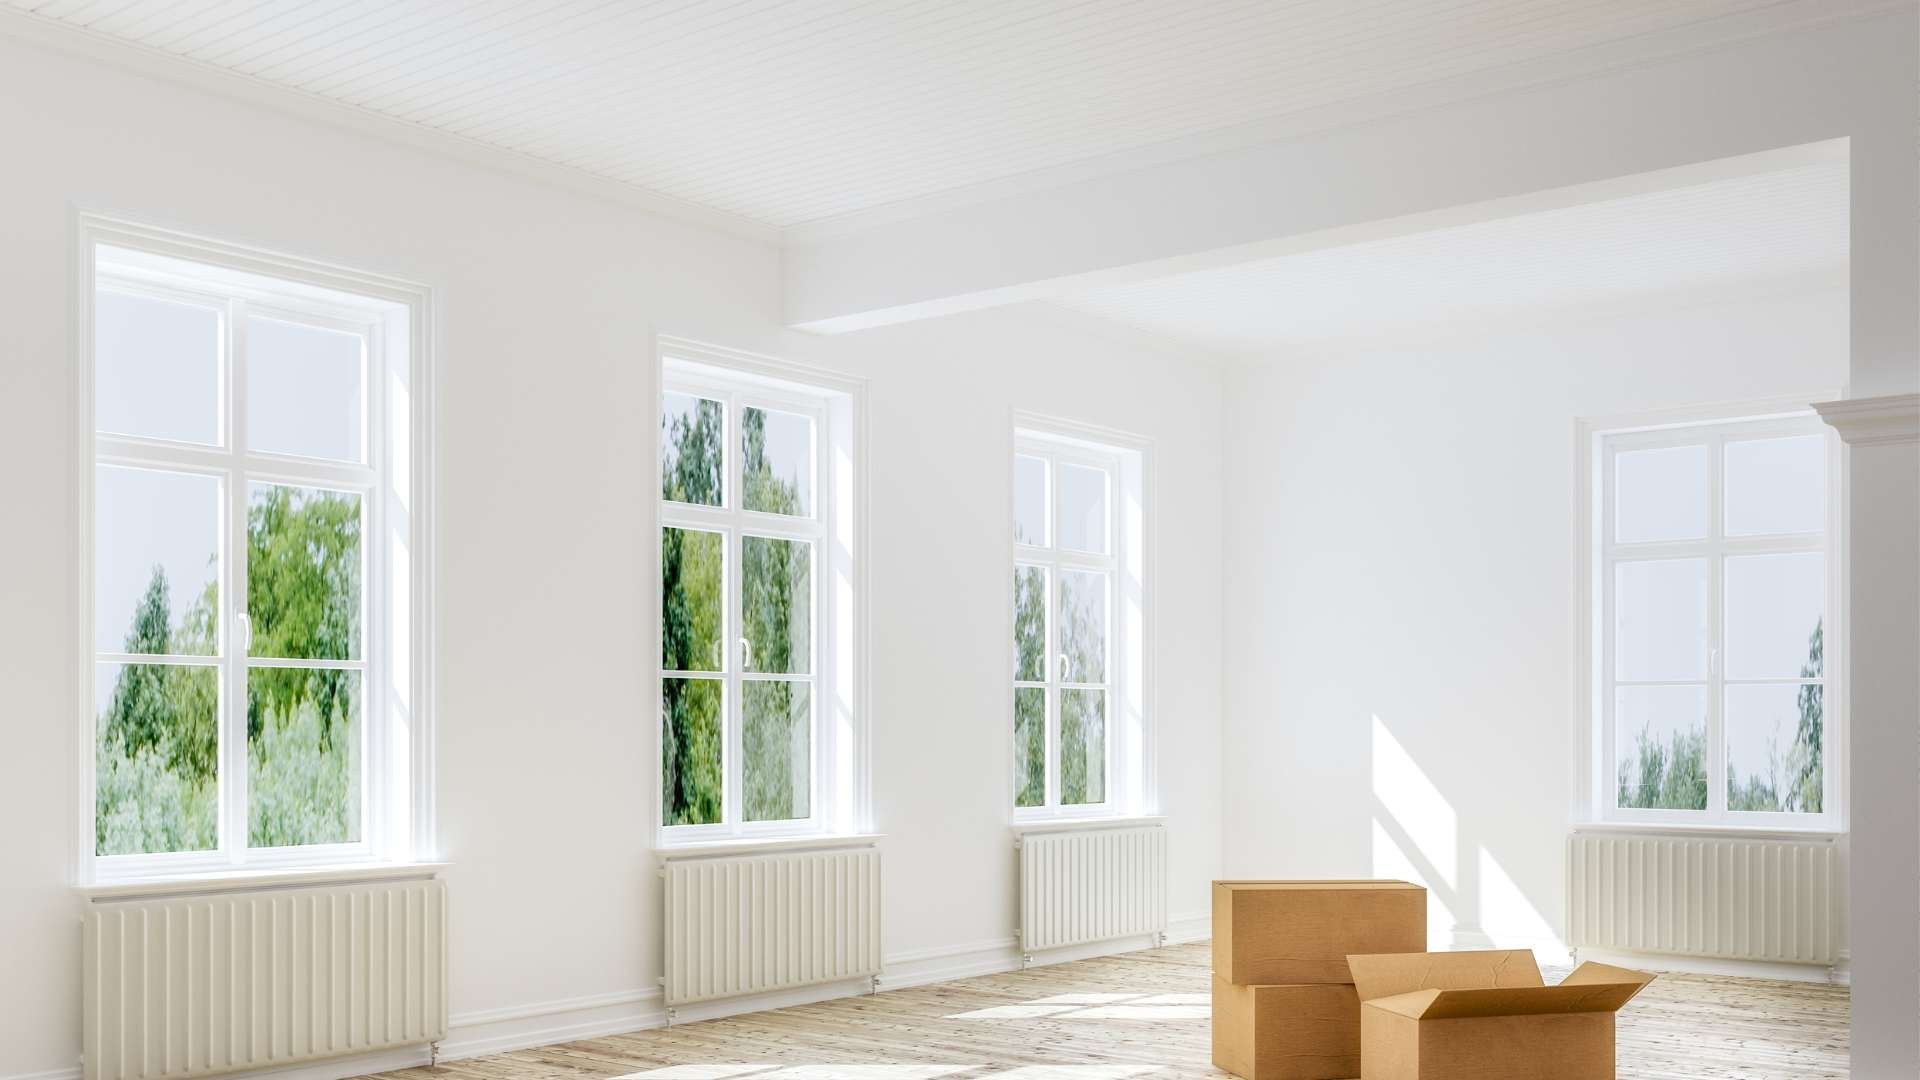 Empty living room with white walls and windows and 3 boxes. 